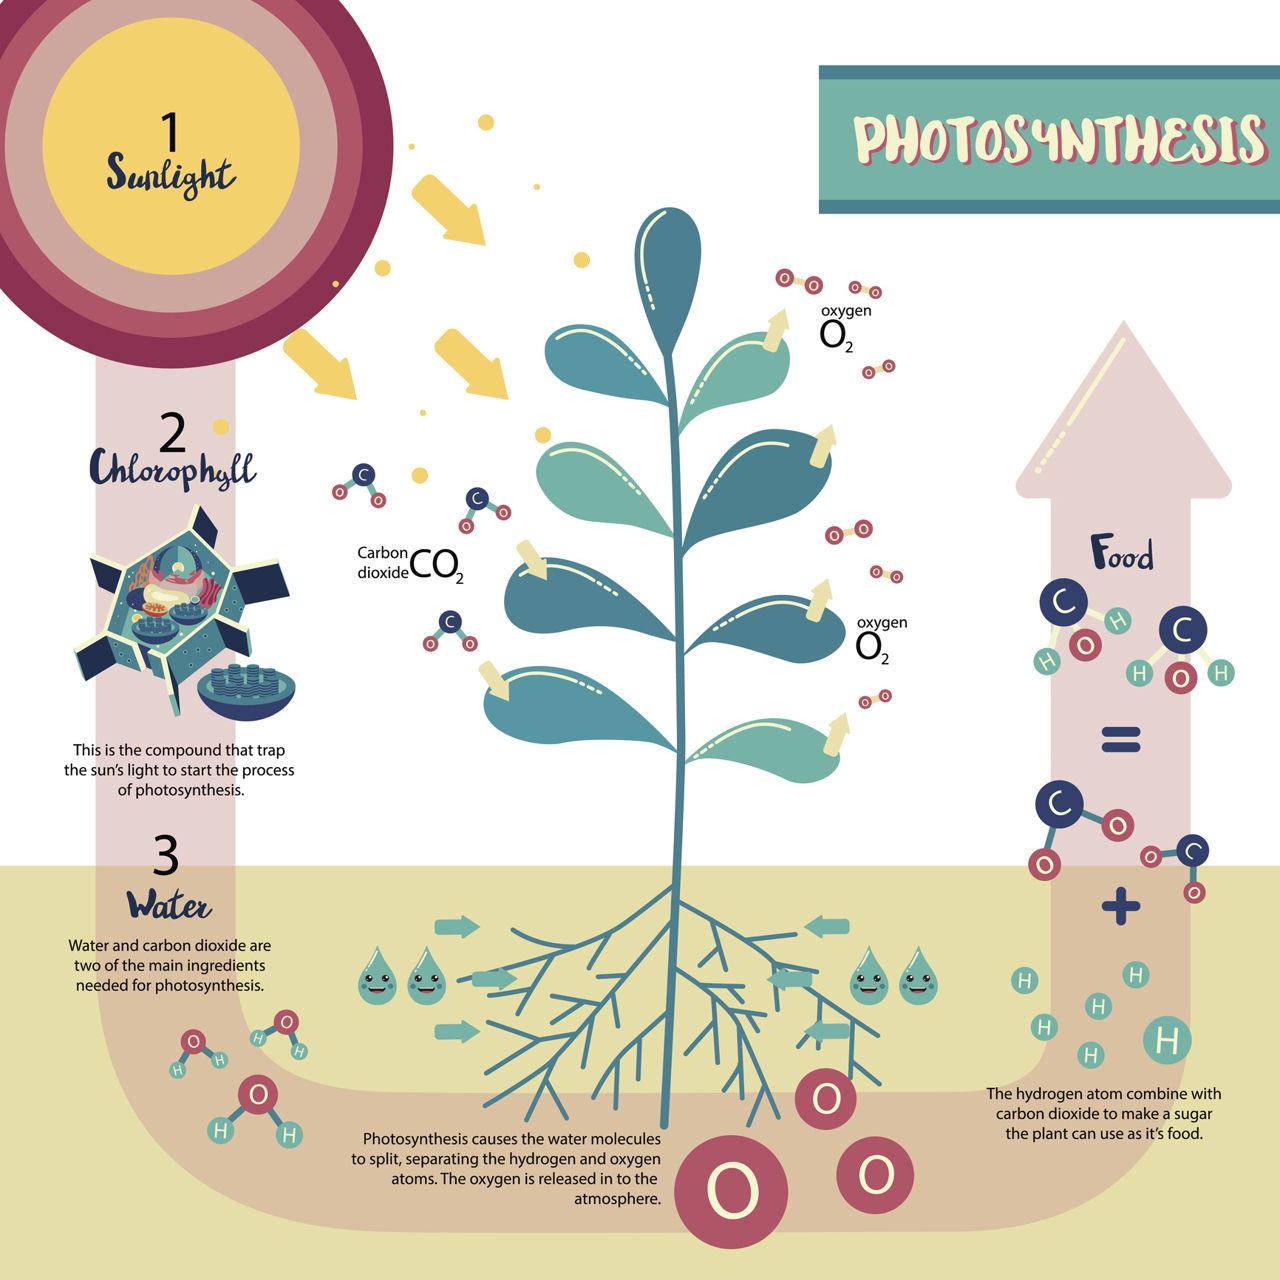 a step-by-step guide to understand the process of photosynthesis